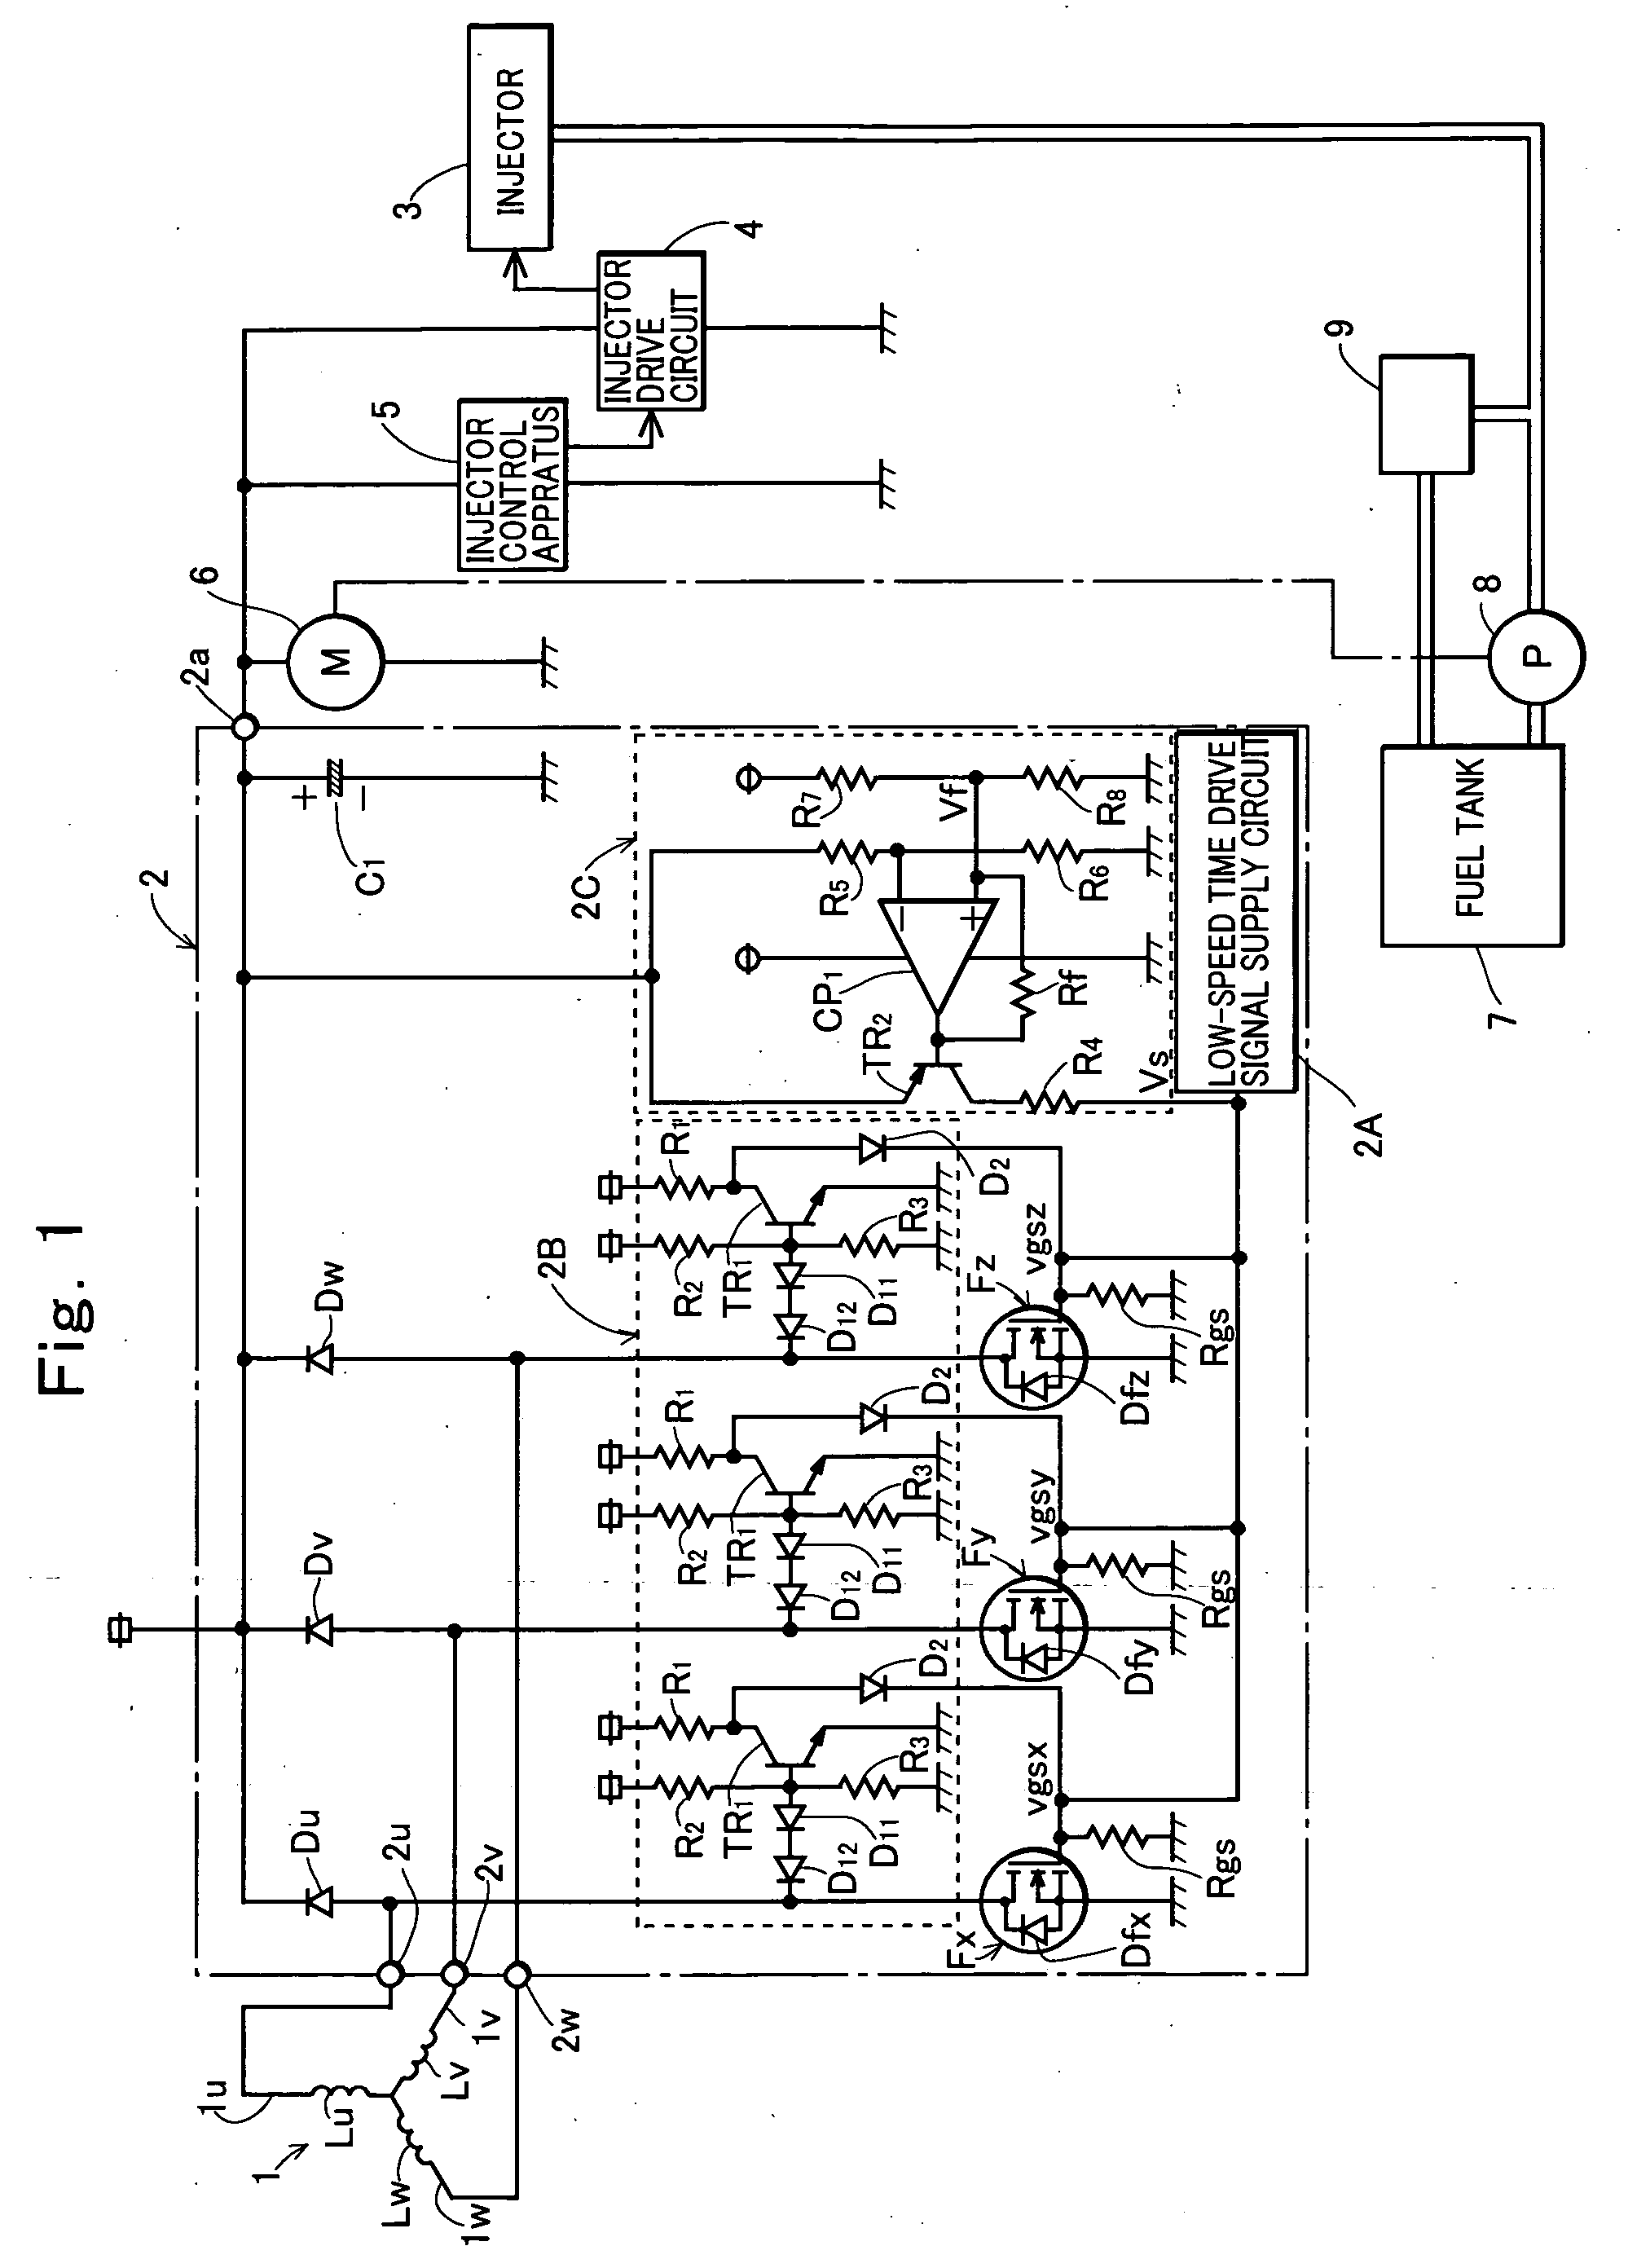 Power supply apparatus for fuel injection apparatus